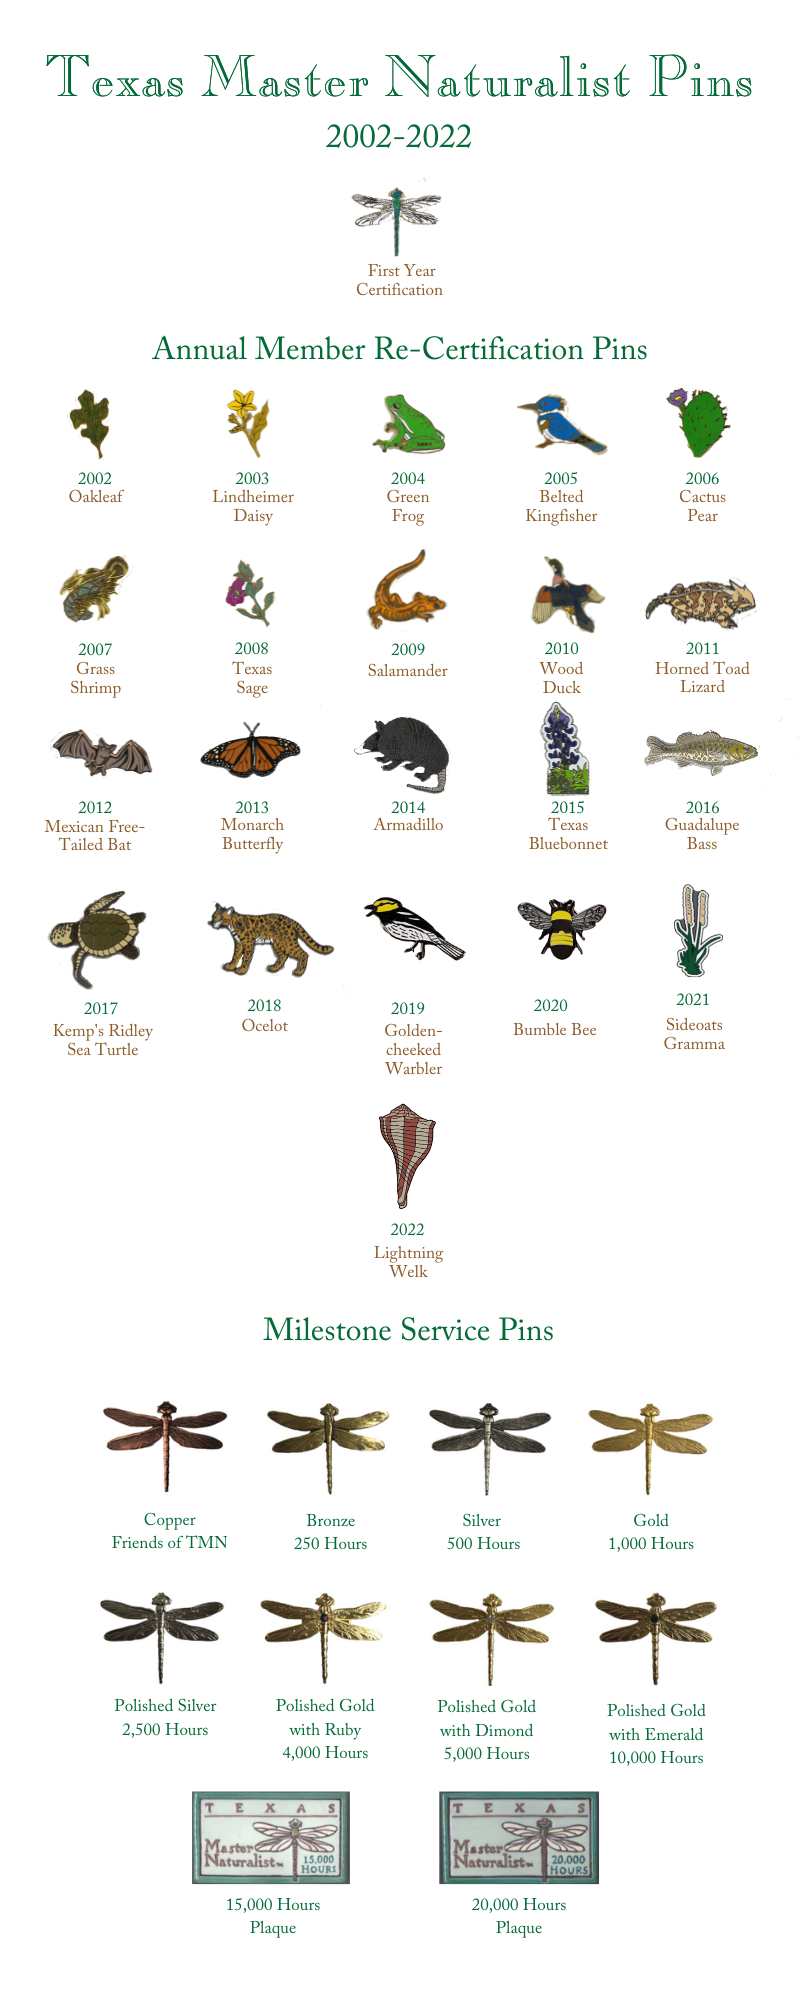 Catalogue of Texas Master Naturalist Service Pins from 2002-2022